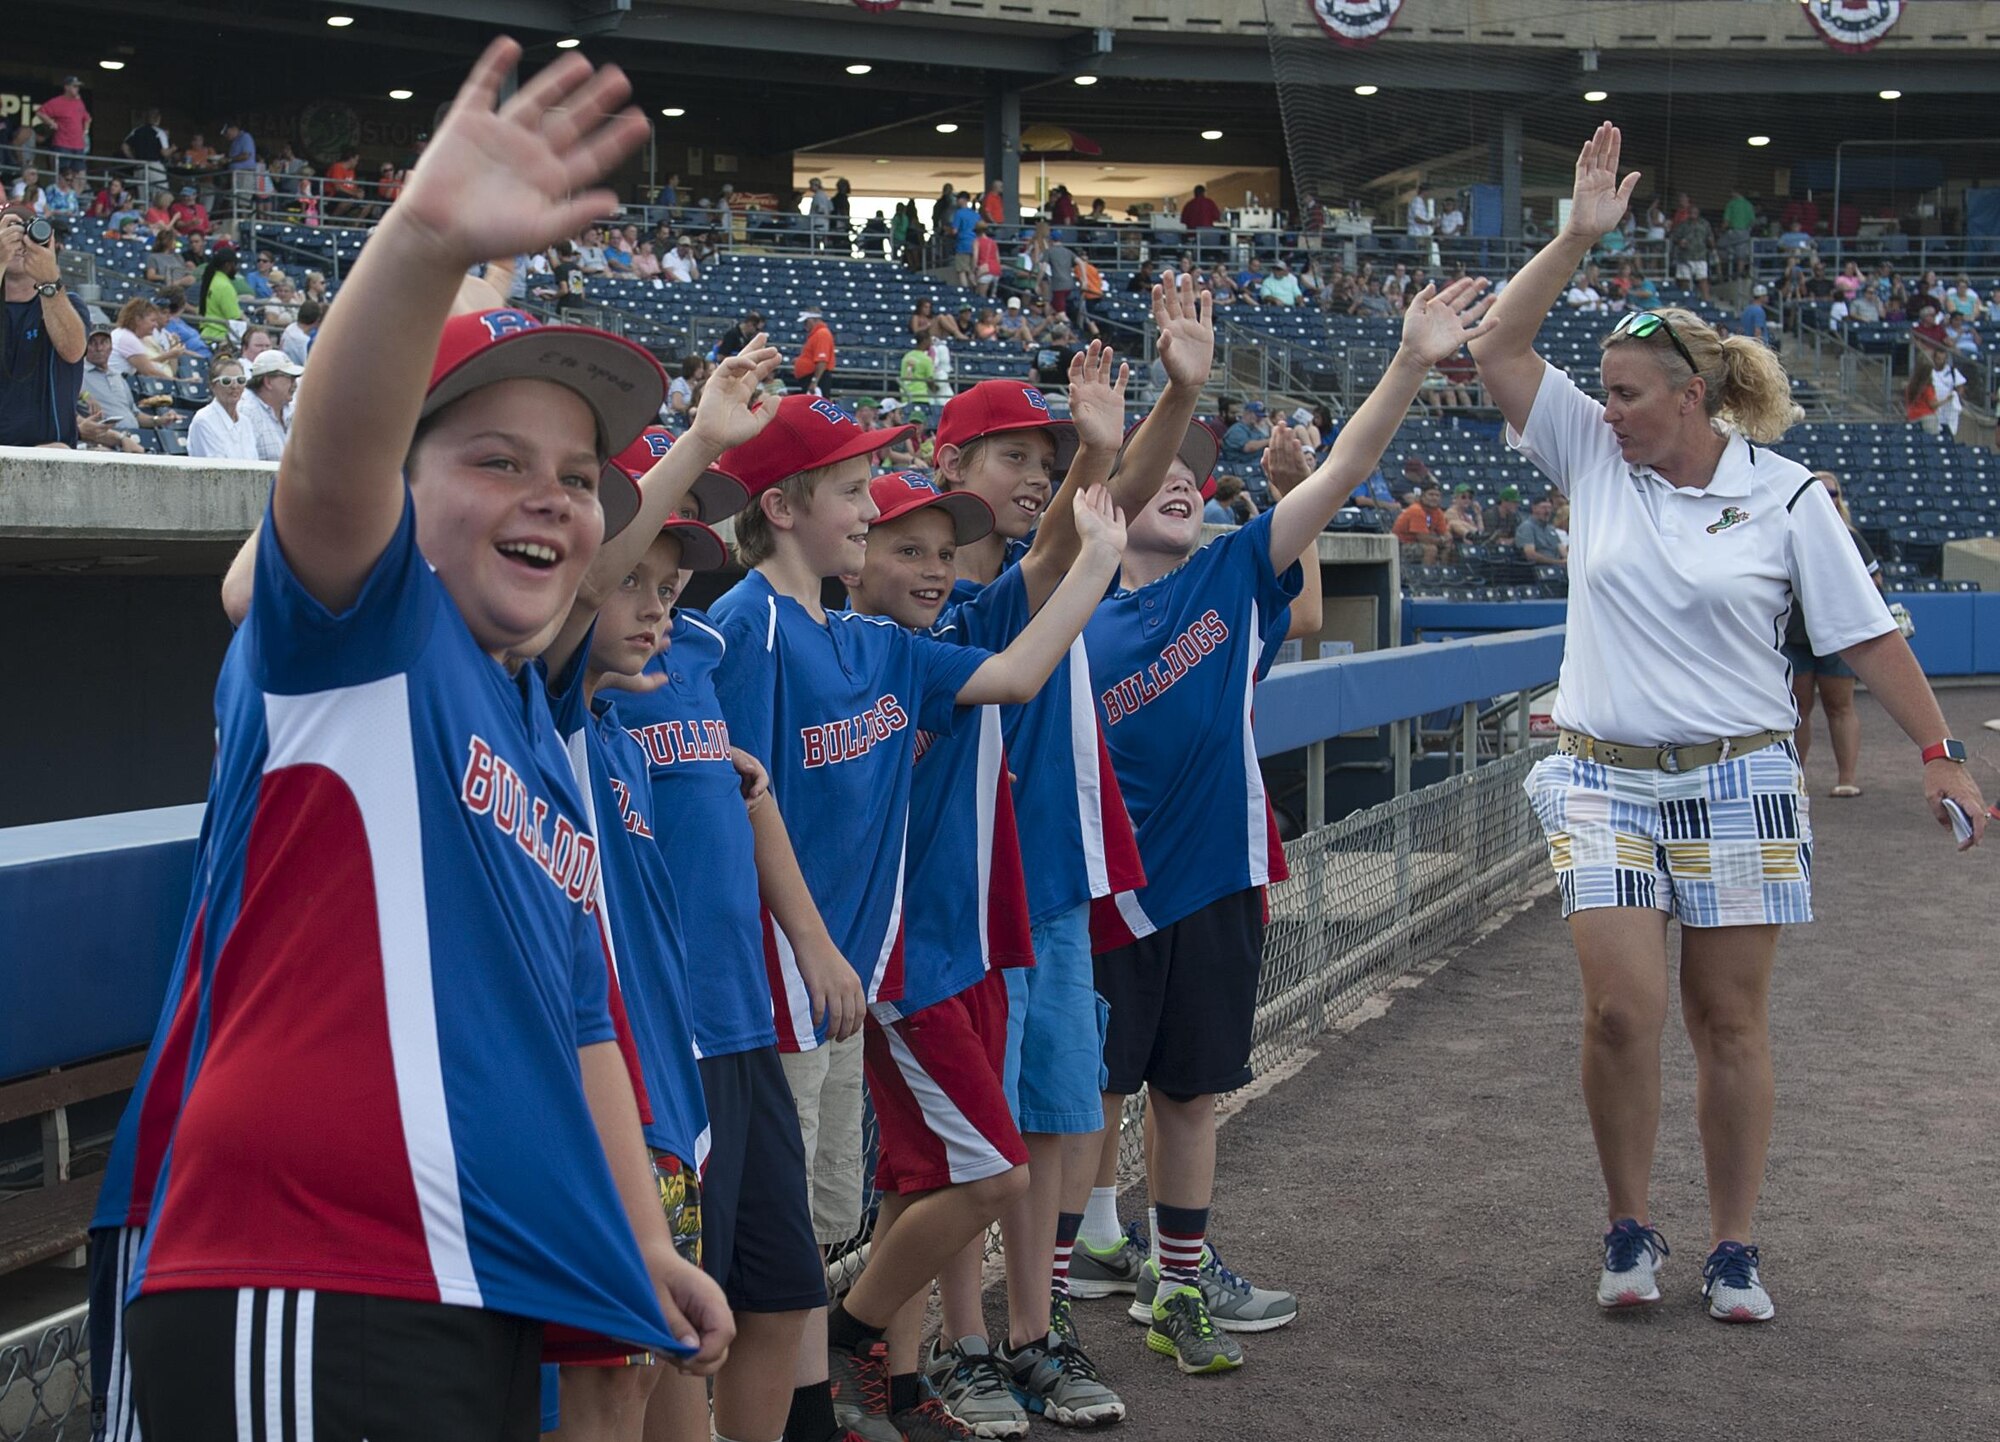 Norfolk Bulldogs Little League baseball team players participate in a meet-and-greet with players from the Norfolk Tides minor league baseball team at the Norfolk Tides Air Force Appreciation Night baseball game in Norfolk, Va., July 23, 2016. Each member of the Bulldogs teamed-up with a Tides player on the field at their respective positions for the opening remarks. (U.S. Air Force photo by Airman 1st Class Kaylee Dubois)